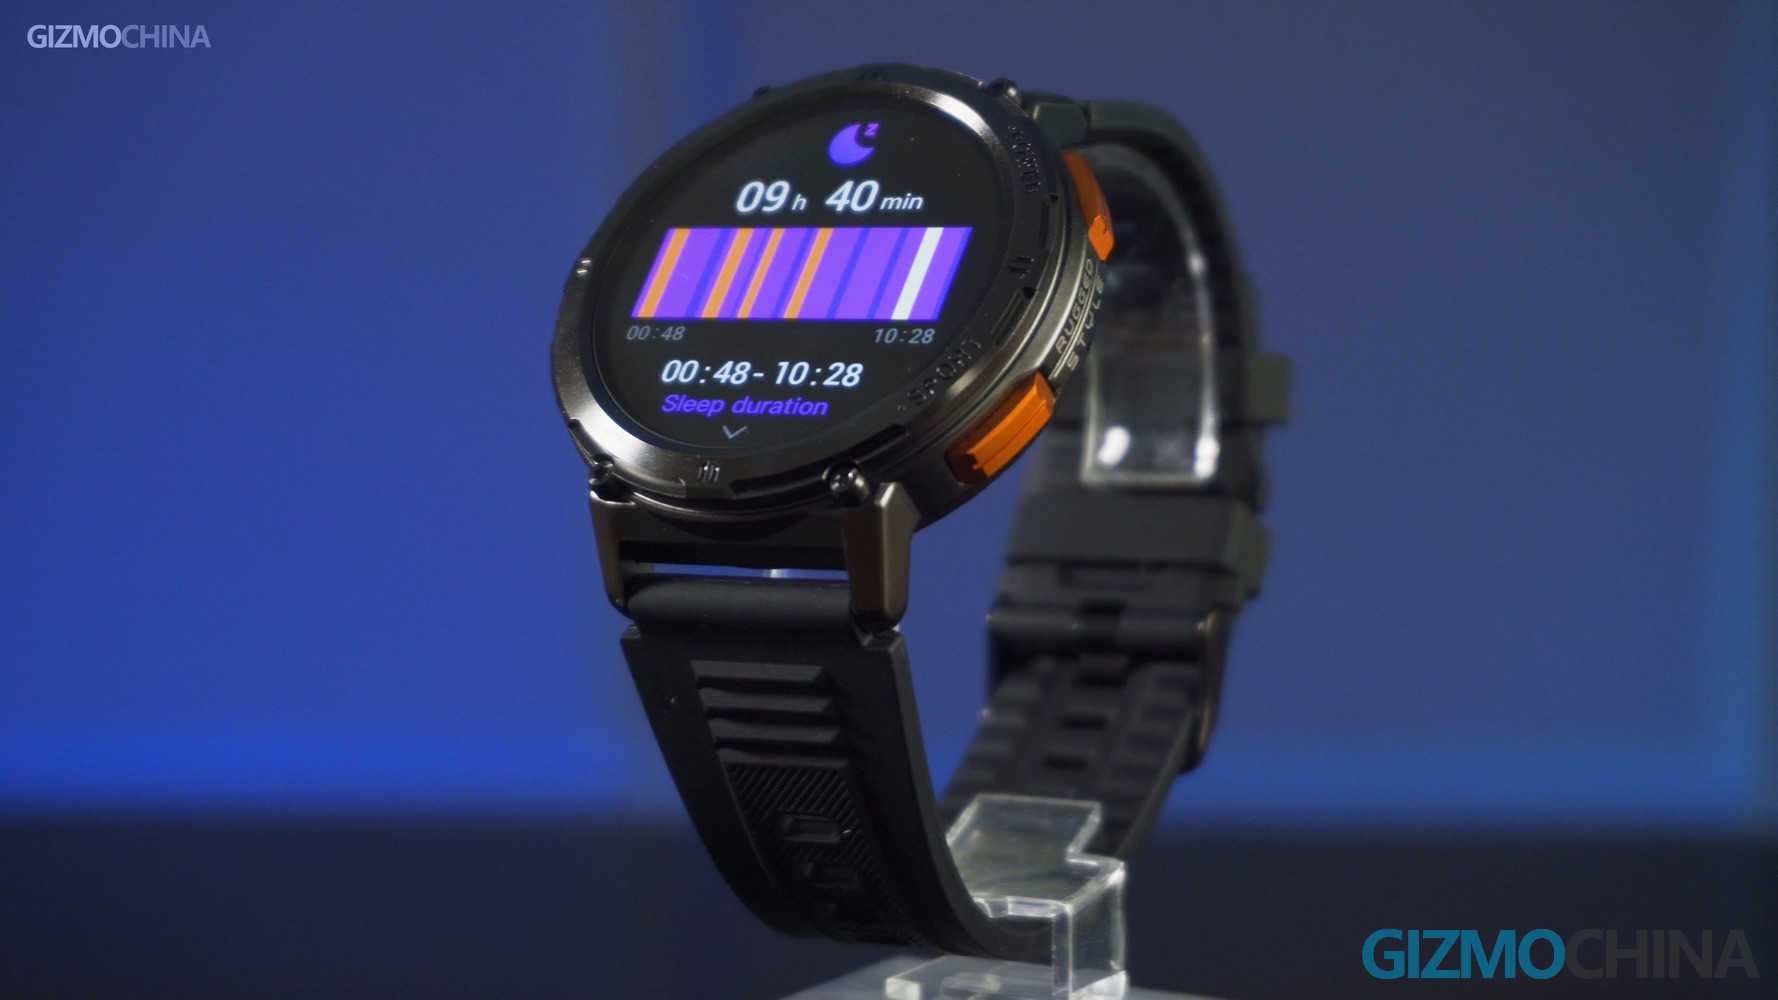 Kospet Tank T2 Review: A Beasty Smartwatch in an Affordable Price